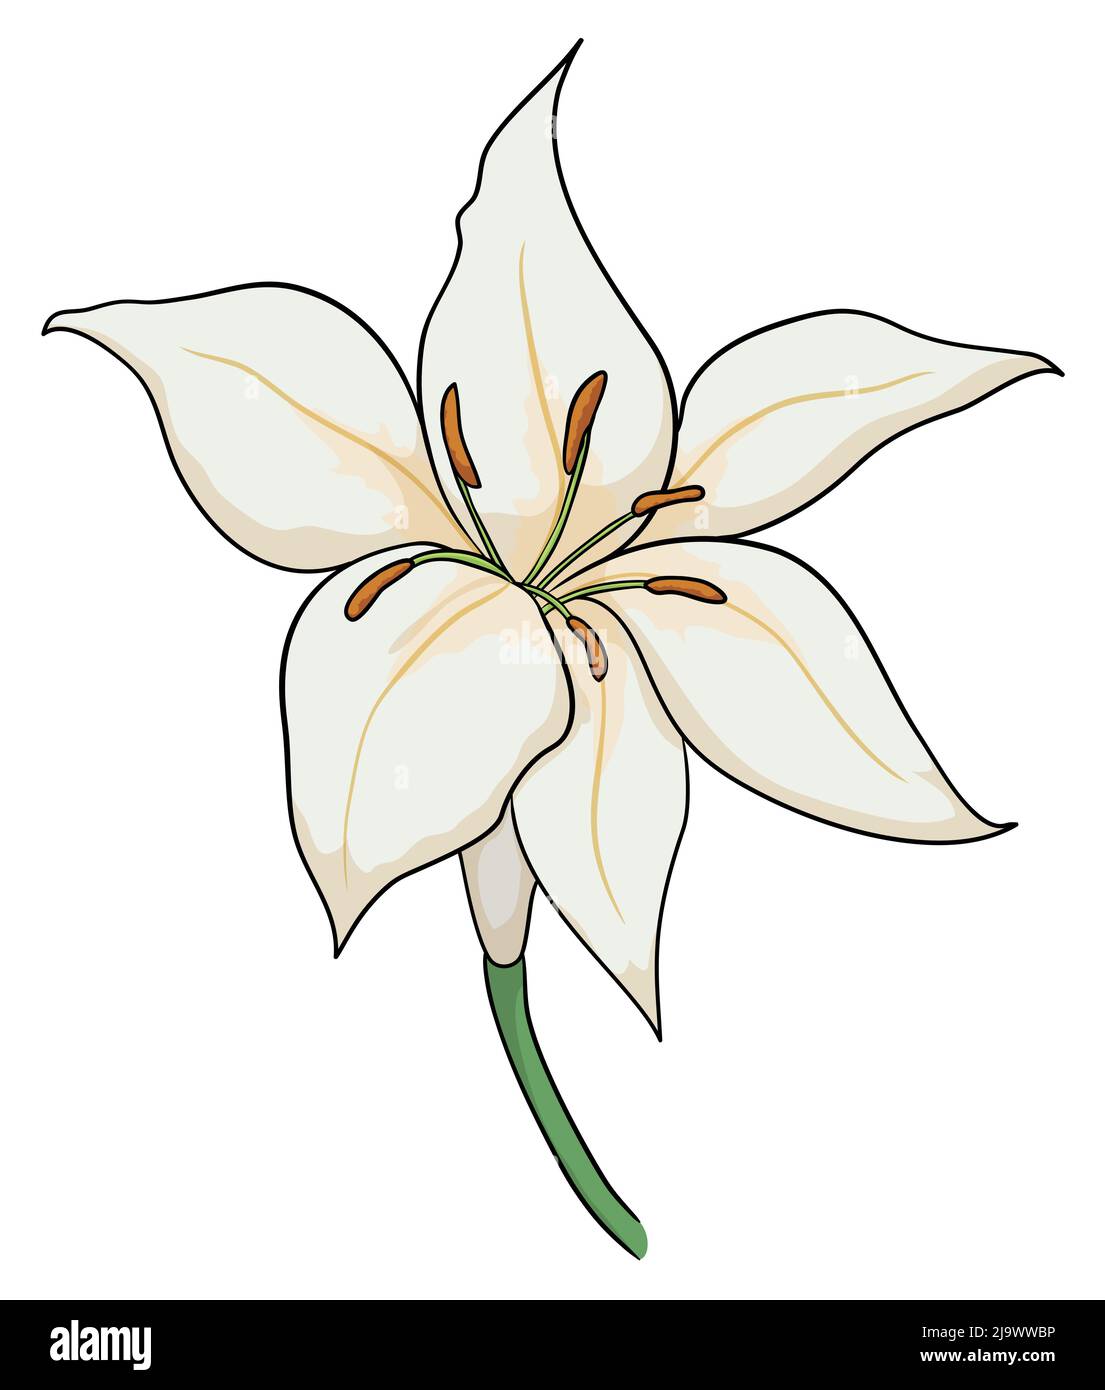 Beautiful close-up view of white lilium with stem. Design in cartoon style over white background. Stock Vector